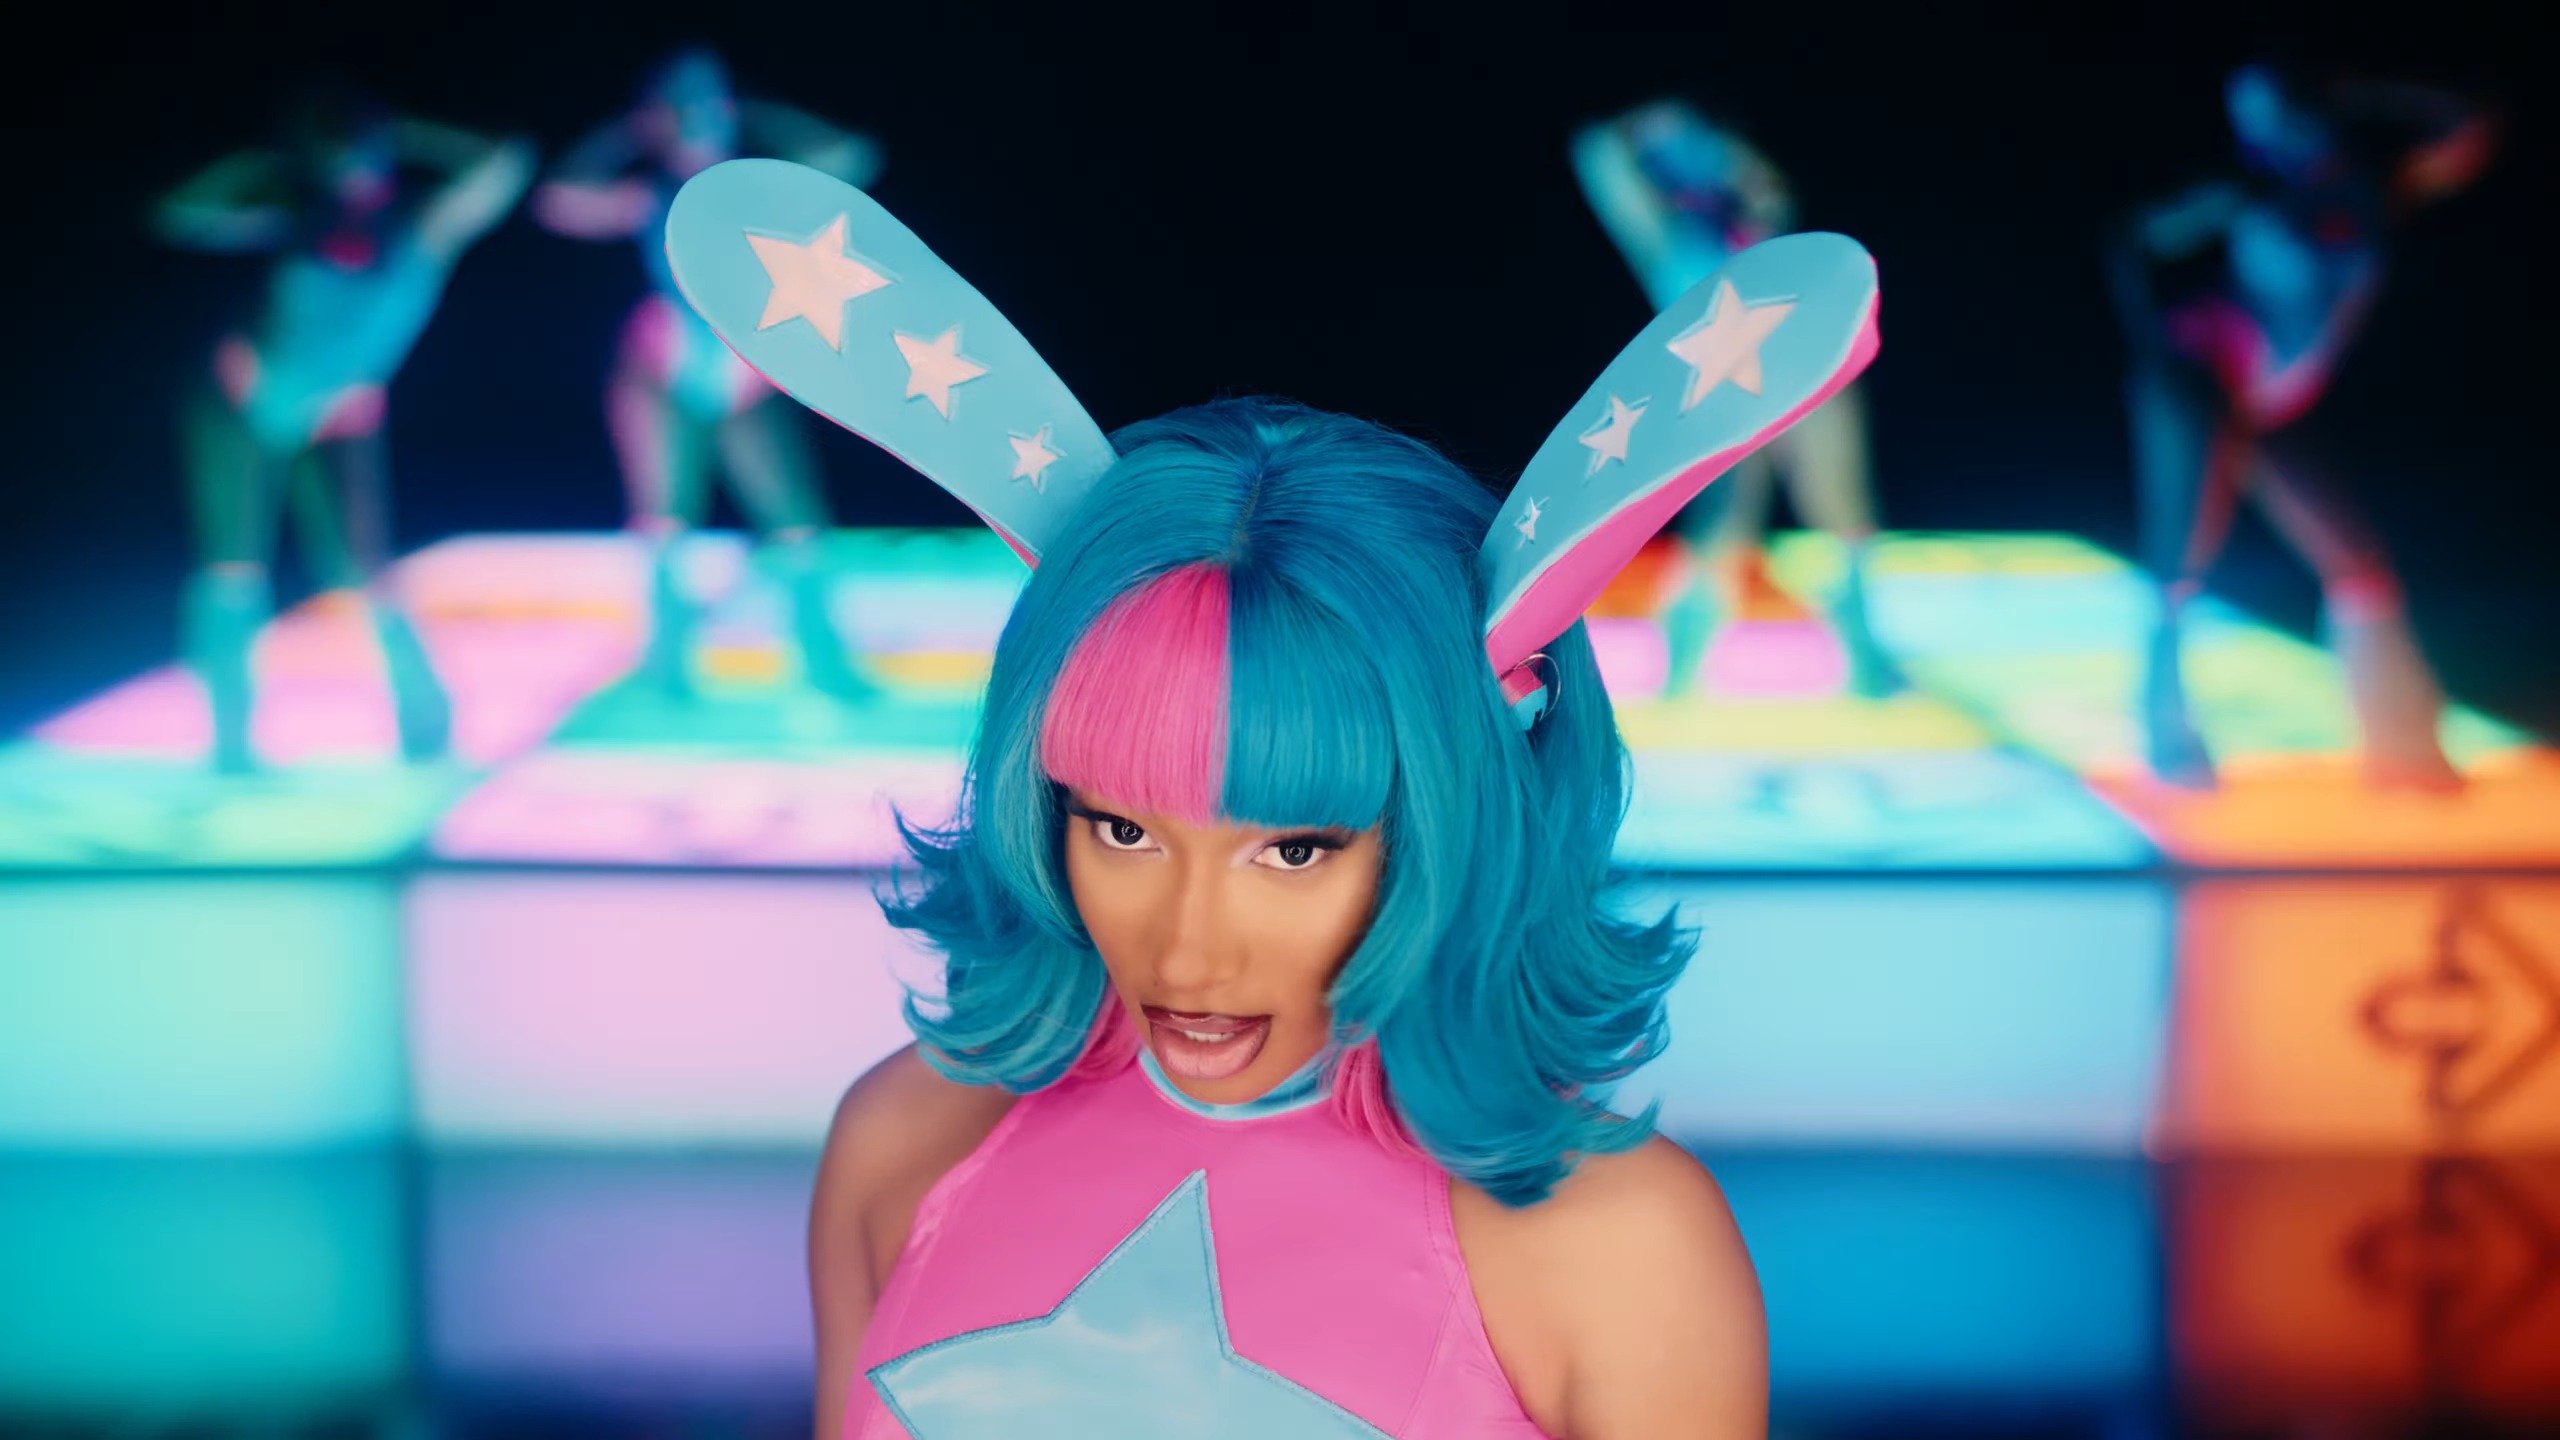 A still from Megan Thee Stallion’s video “BOA” in which the singer appears in a blue and pink anime rabbit girl outfit in front of a lighted Dance Dance Revolution-inspired stage with back-up dancers.